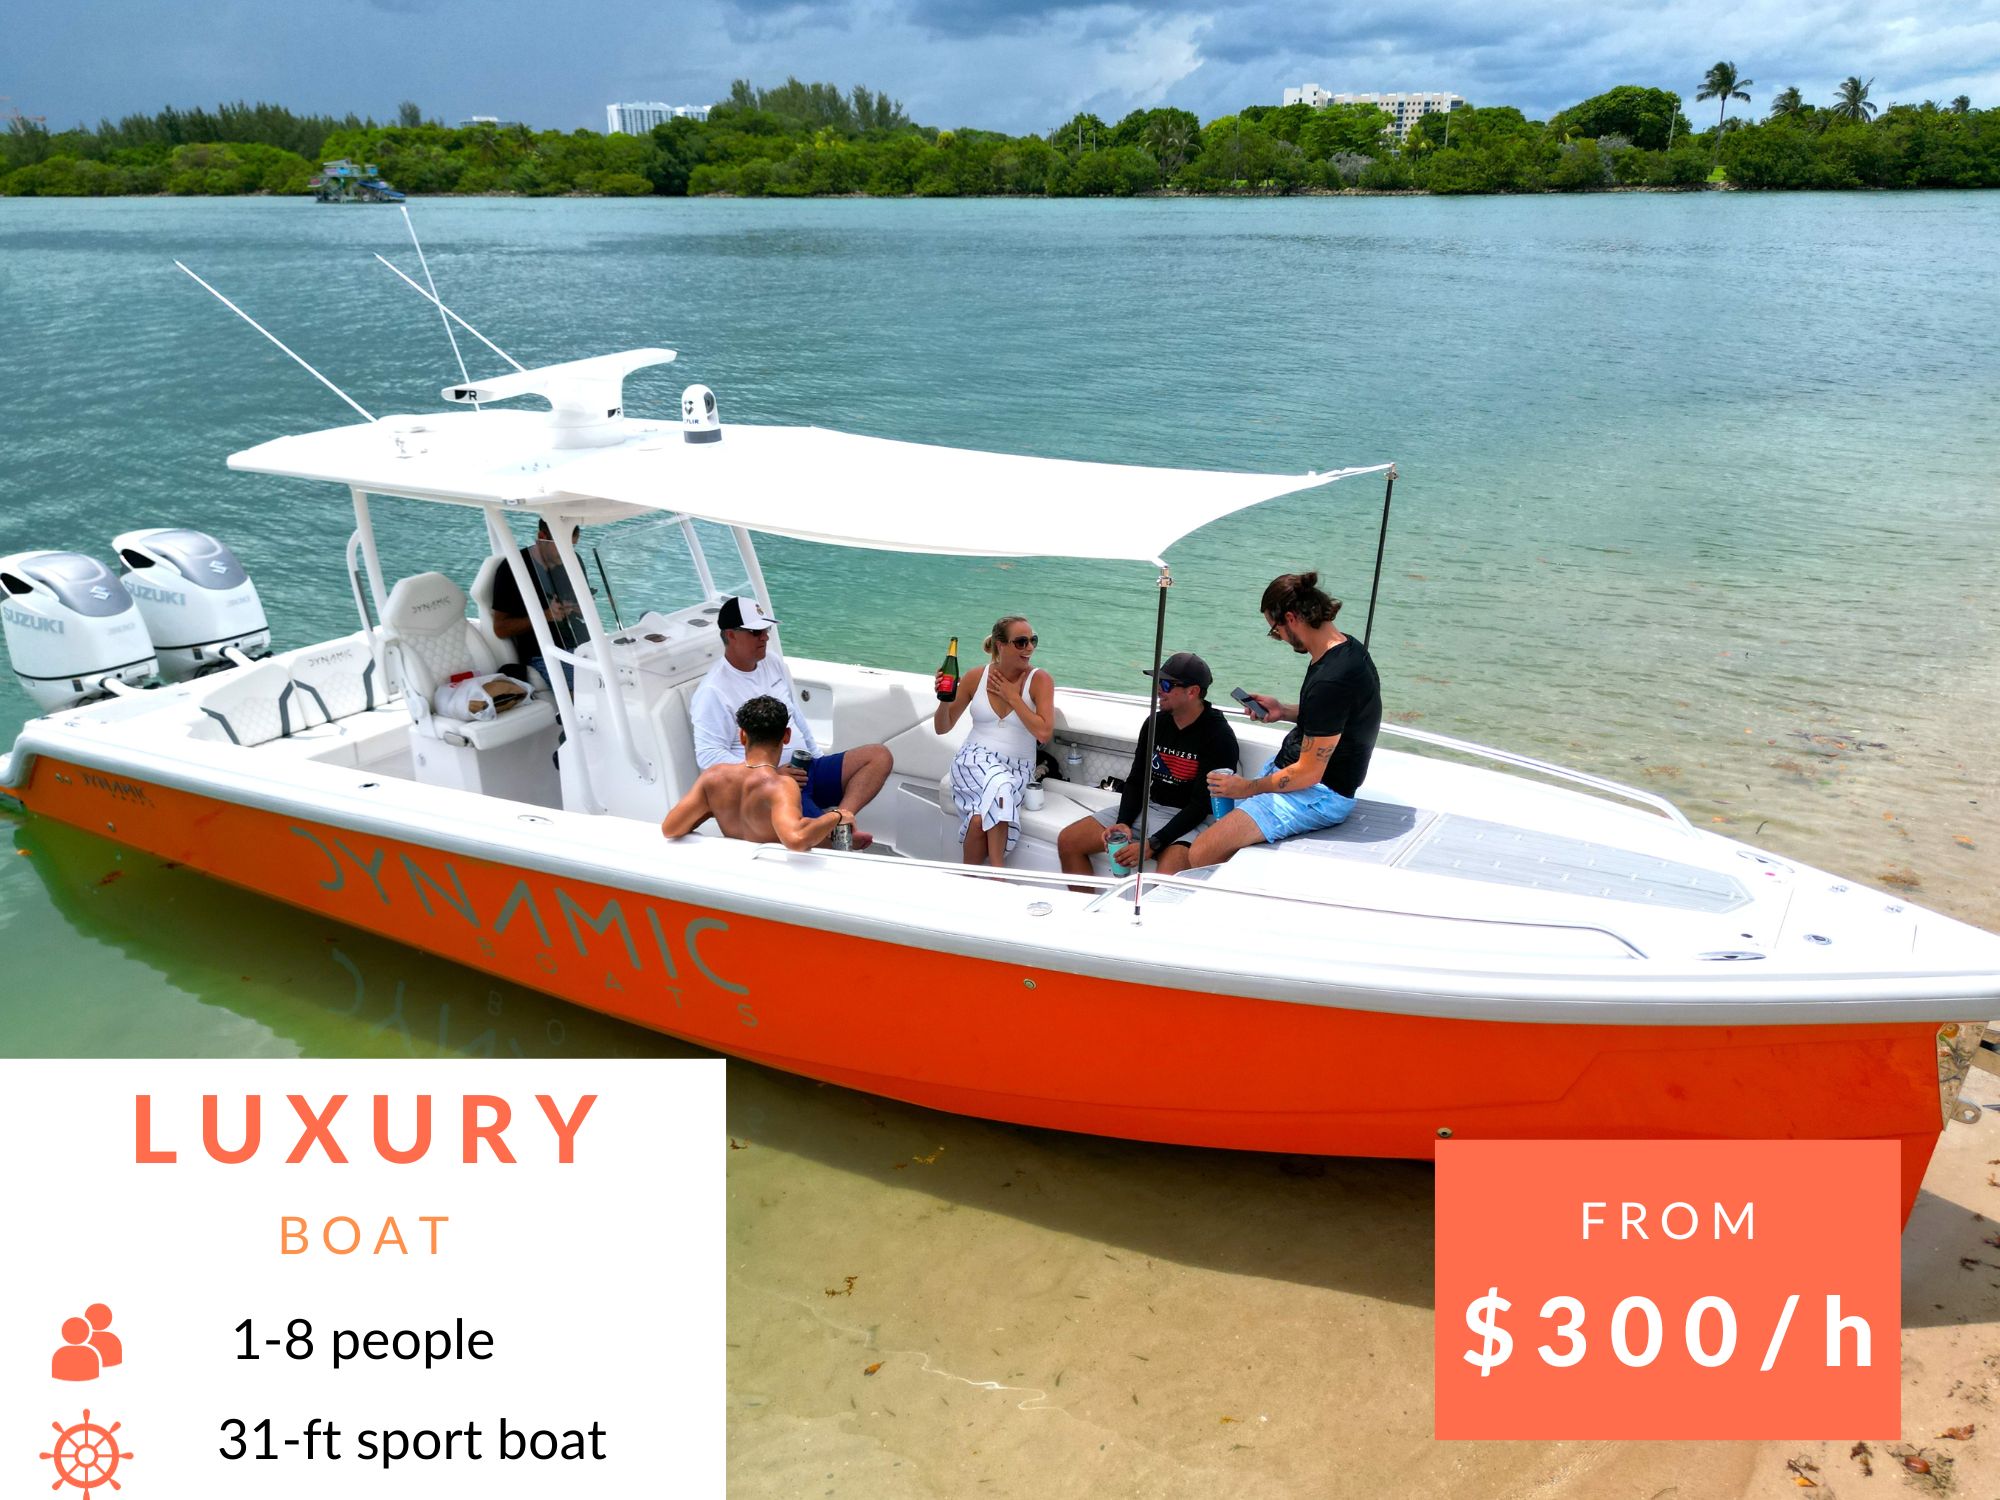 Best Luxury Boat Rentals In Miami For Social Gatherings. Dynamic Boat Rentals.